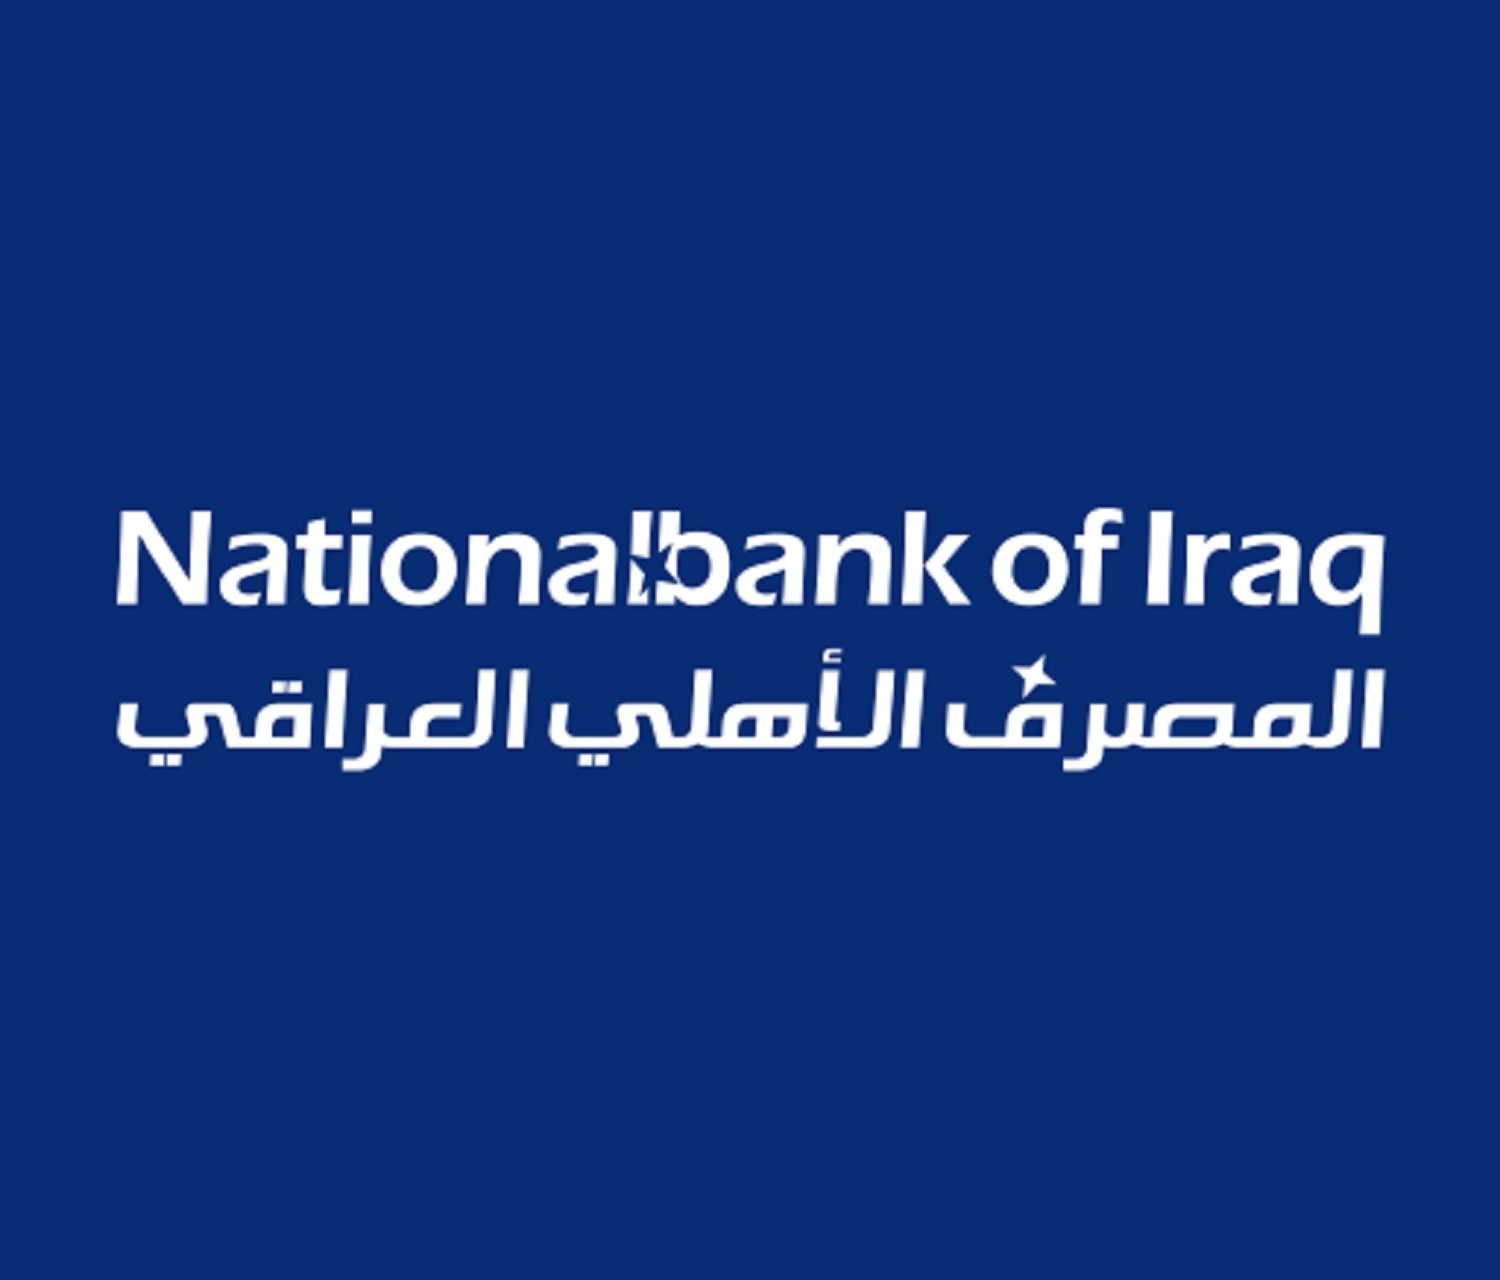 National Bank of Iraq appoints Bashir Mraish Consultancy to manage its public relations in Iraq